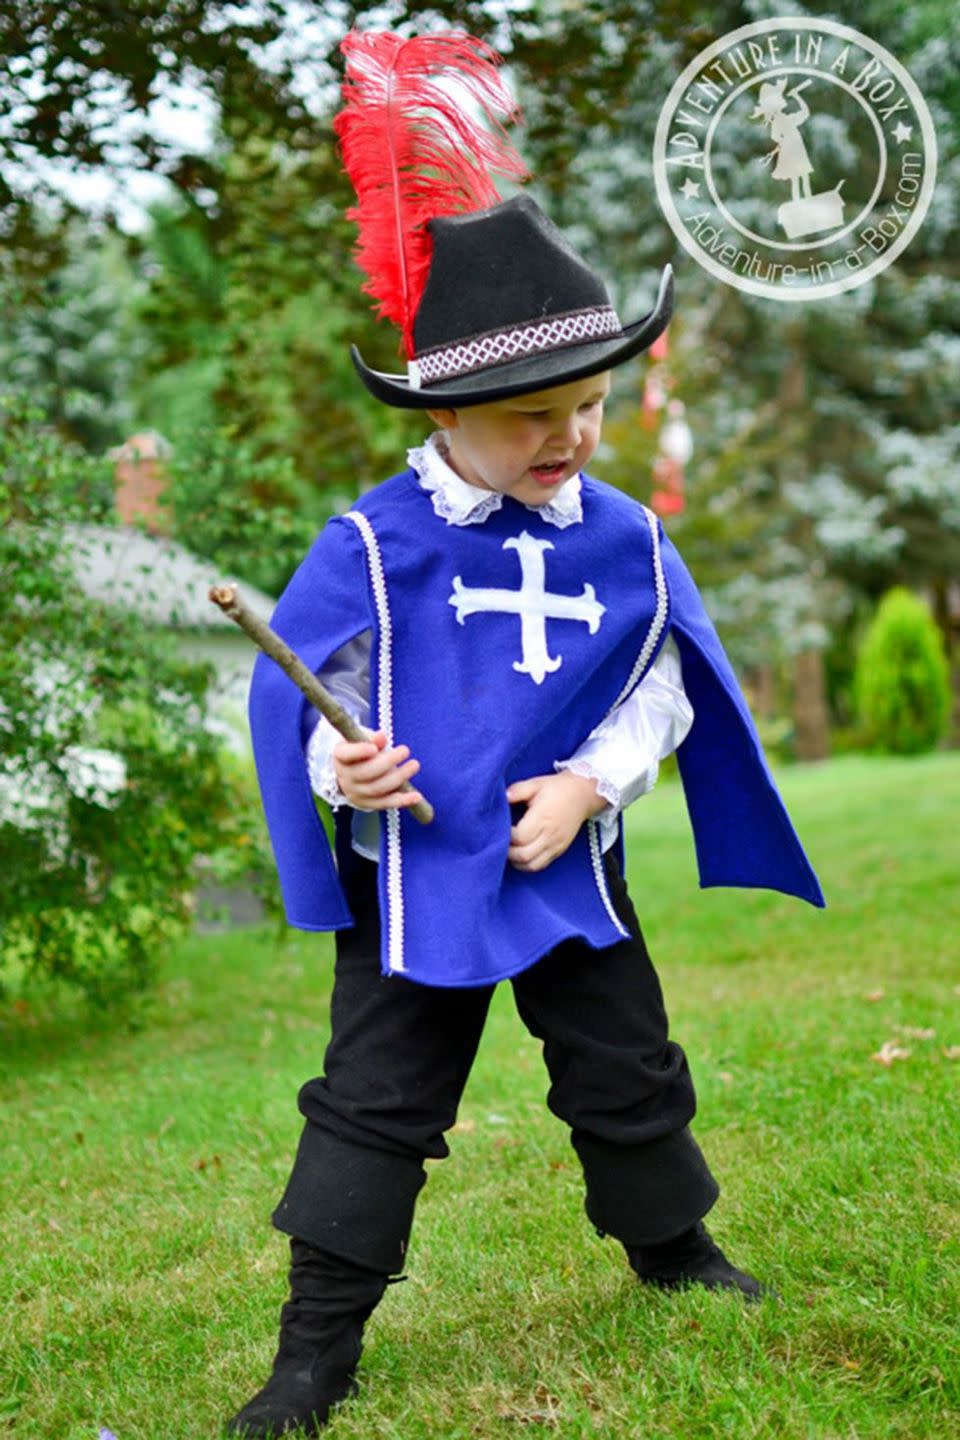 <p>You'll just need two more pals to give this swashbuckling costume an adorably authentic feel. Oh, and that hat feather is a must-add detail!</p><p><strong>Get the tutorial at <a href="http://www.adventure-in-a-box.com/how-to-make-a-musketeer-costume-for-halloween/" rel="nofollow noopener" target="_blank" data-ylk="slk:Adventure in a Box" class="link ">Adventure in a Box</a>.</strong></p>